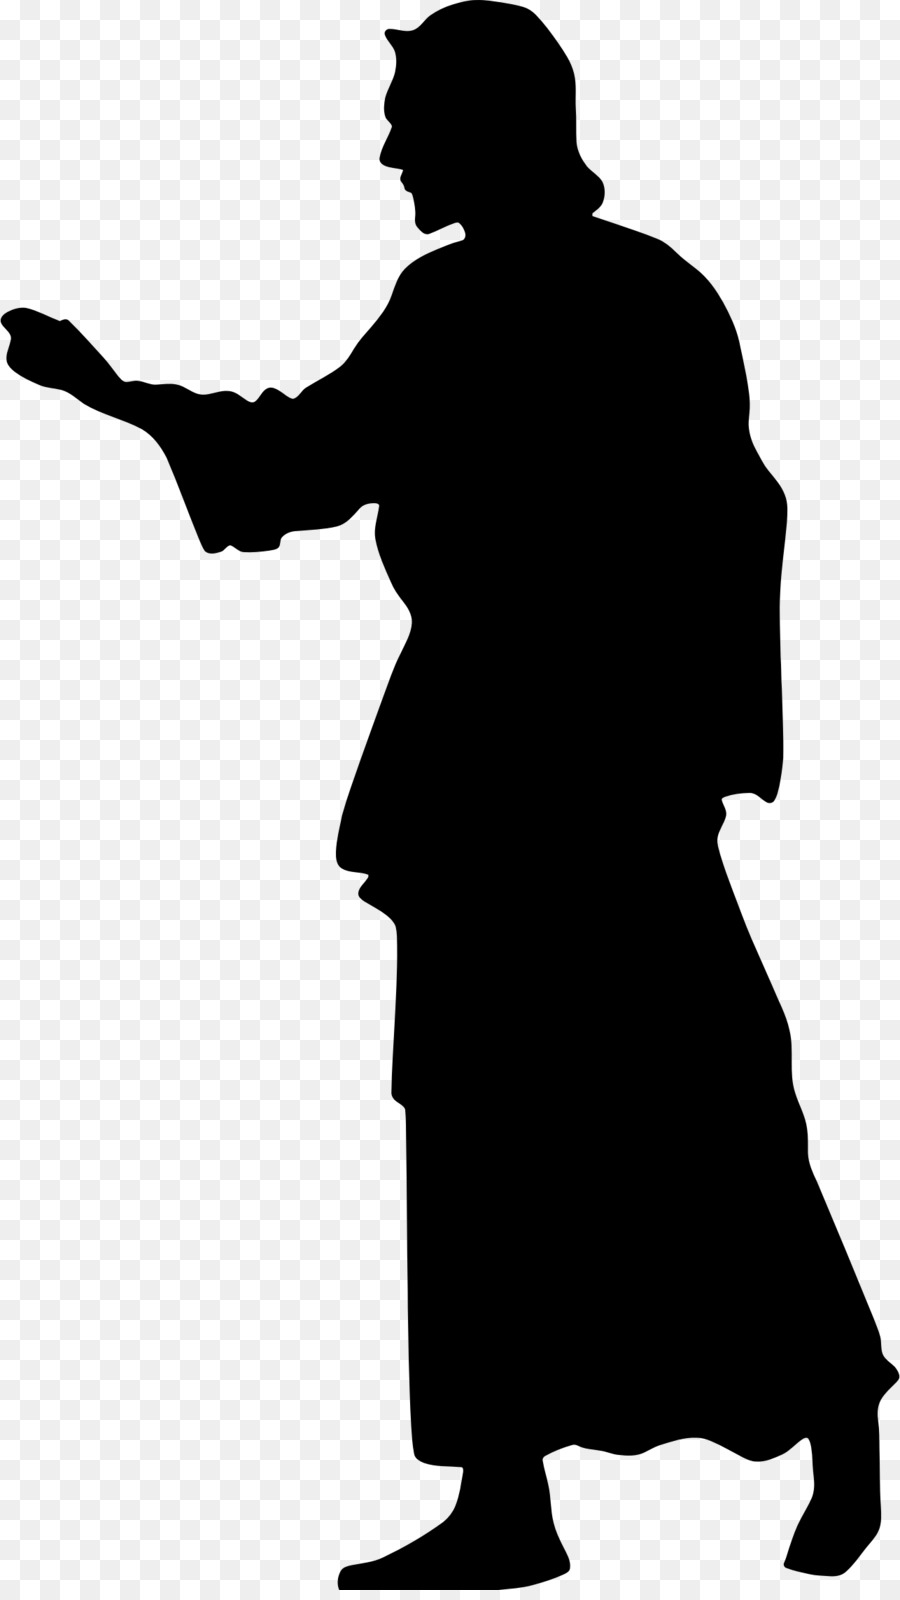 Silhouette Crucifixion of Jesus Clip art - jesus christ png download - 1286*2272 - Free Transparent Silhouette png Download.